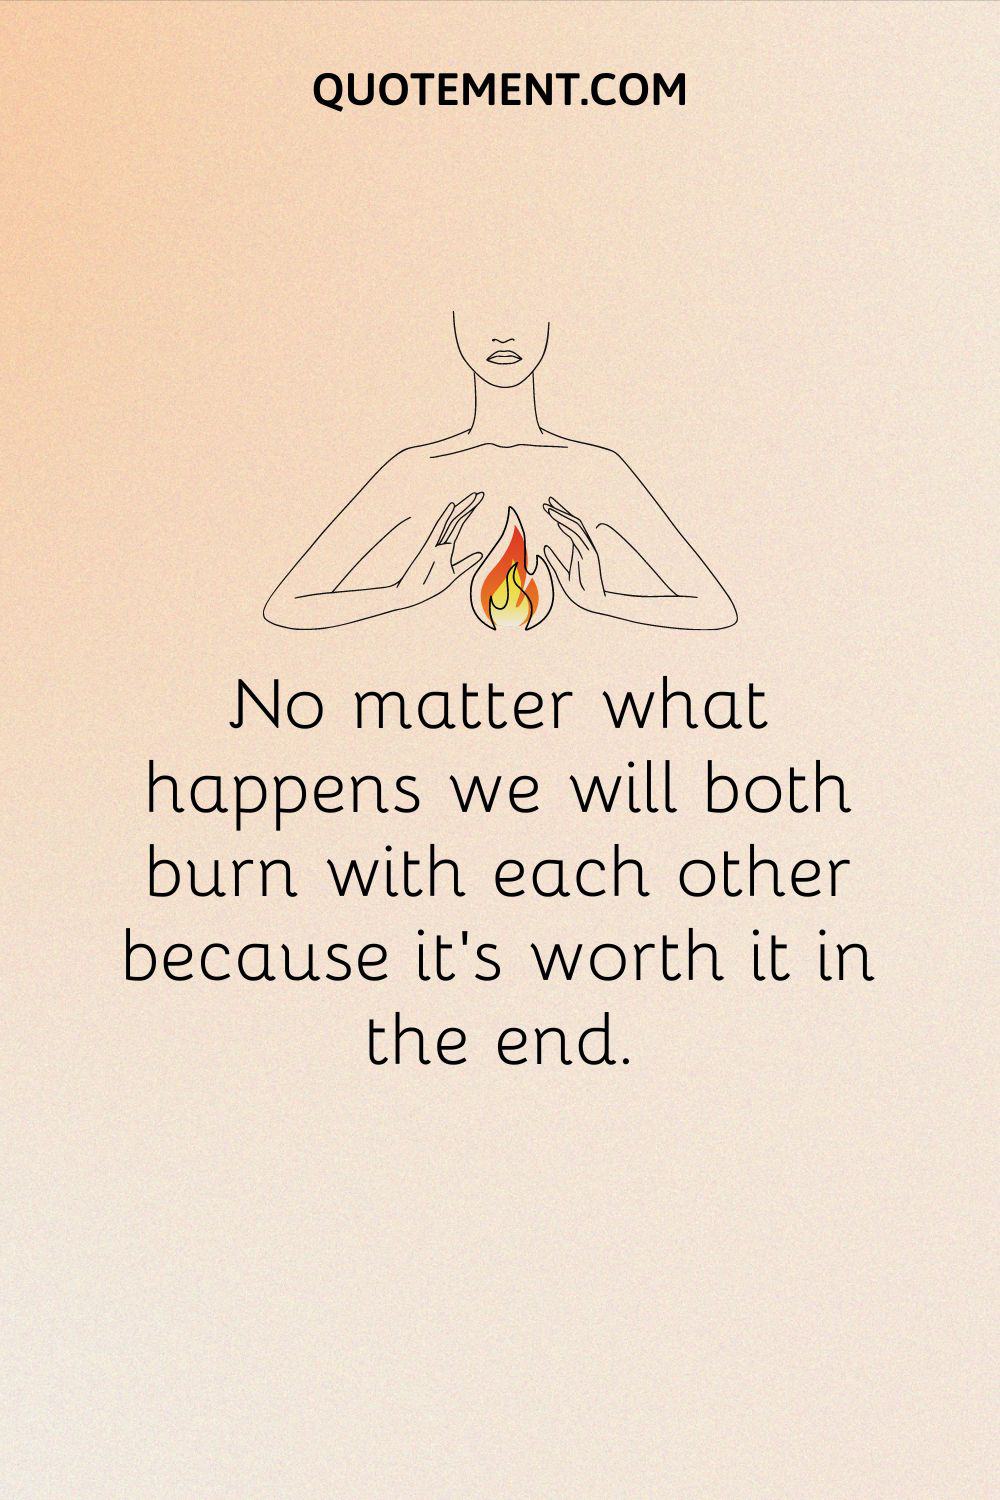 No matter what happens, we will both burn with each other because it’s worth it in the end